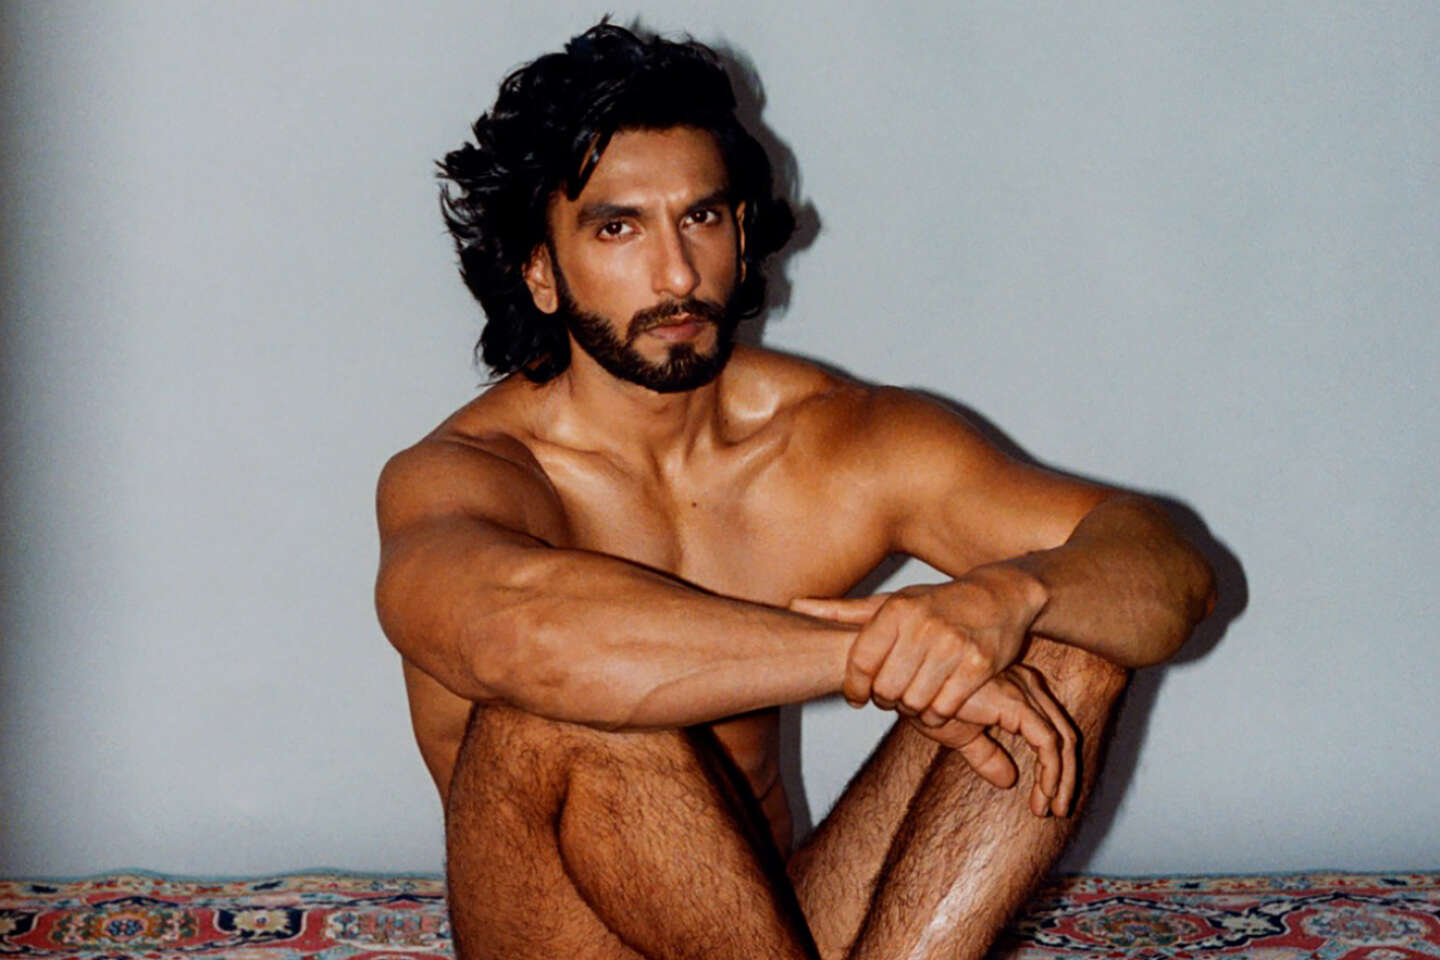 1440px x 960px - Nude photos of a Bollywood actor are setting India abuzz